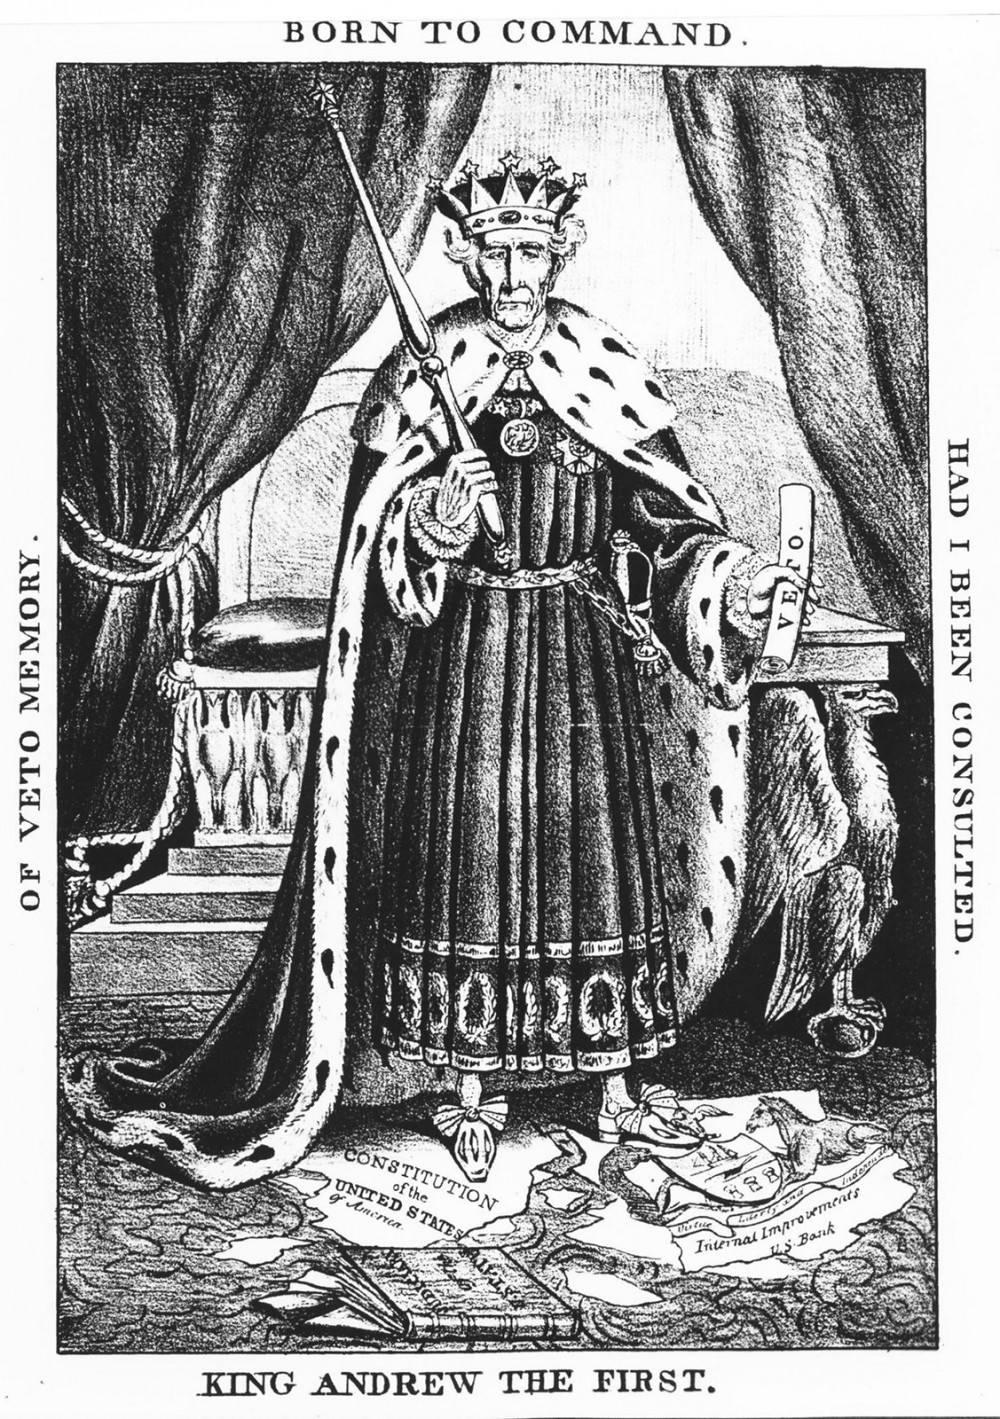 A political cartoon showing Andrew Jackson dressed in traditional king's clothing. He wears a crown and holds a scepter in one hand and a scroll that says Veto in the other. The caption of the cartoon says King Andrew the first, of veto memory, born to command, had I been consulted.